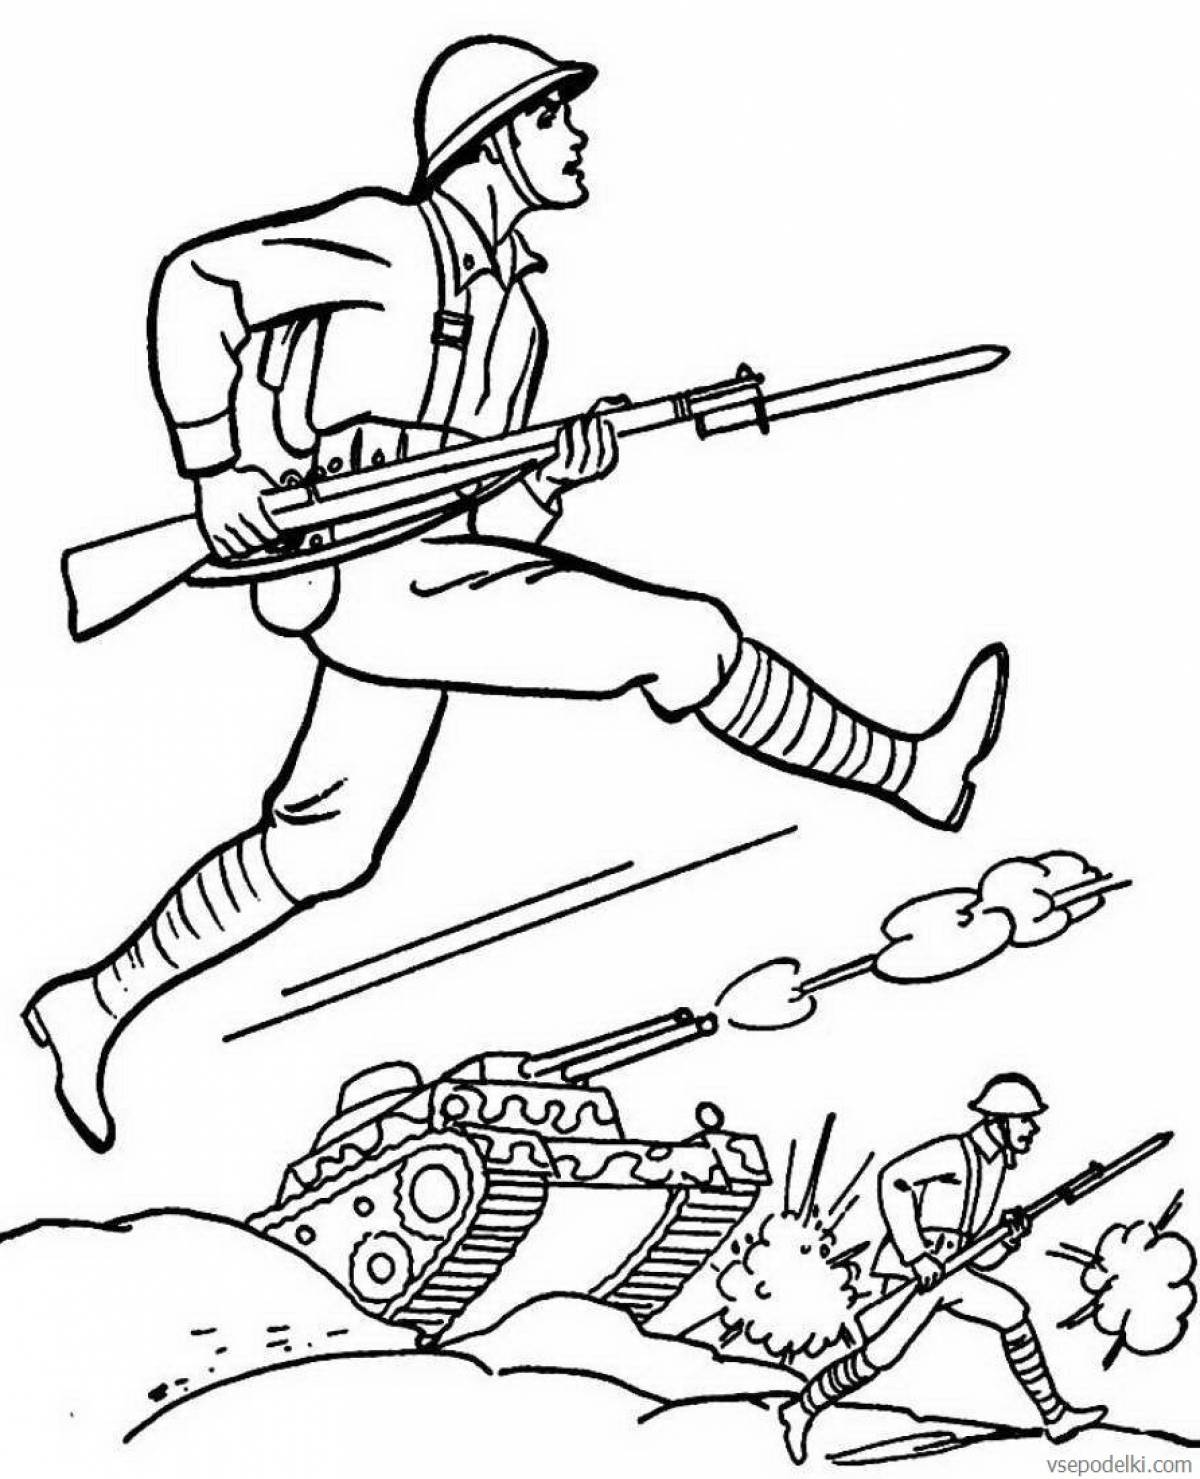 Amazing military profession coloring book for kids